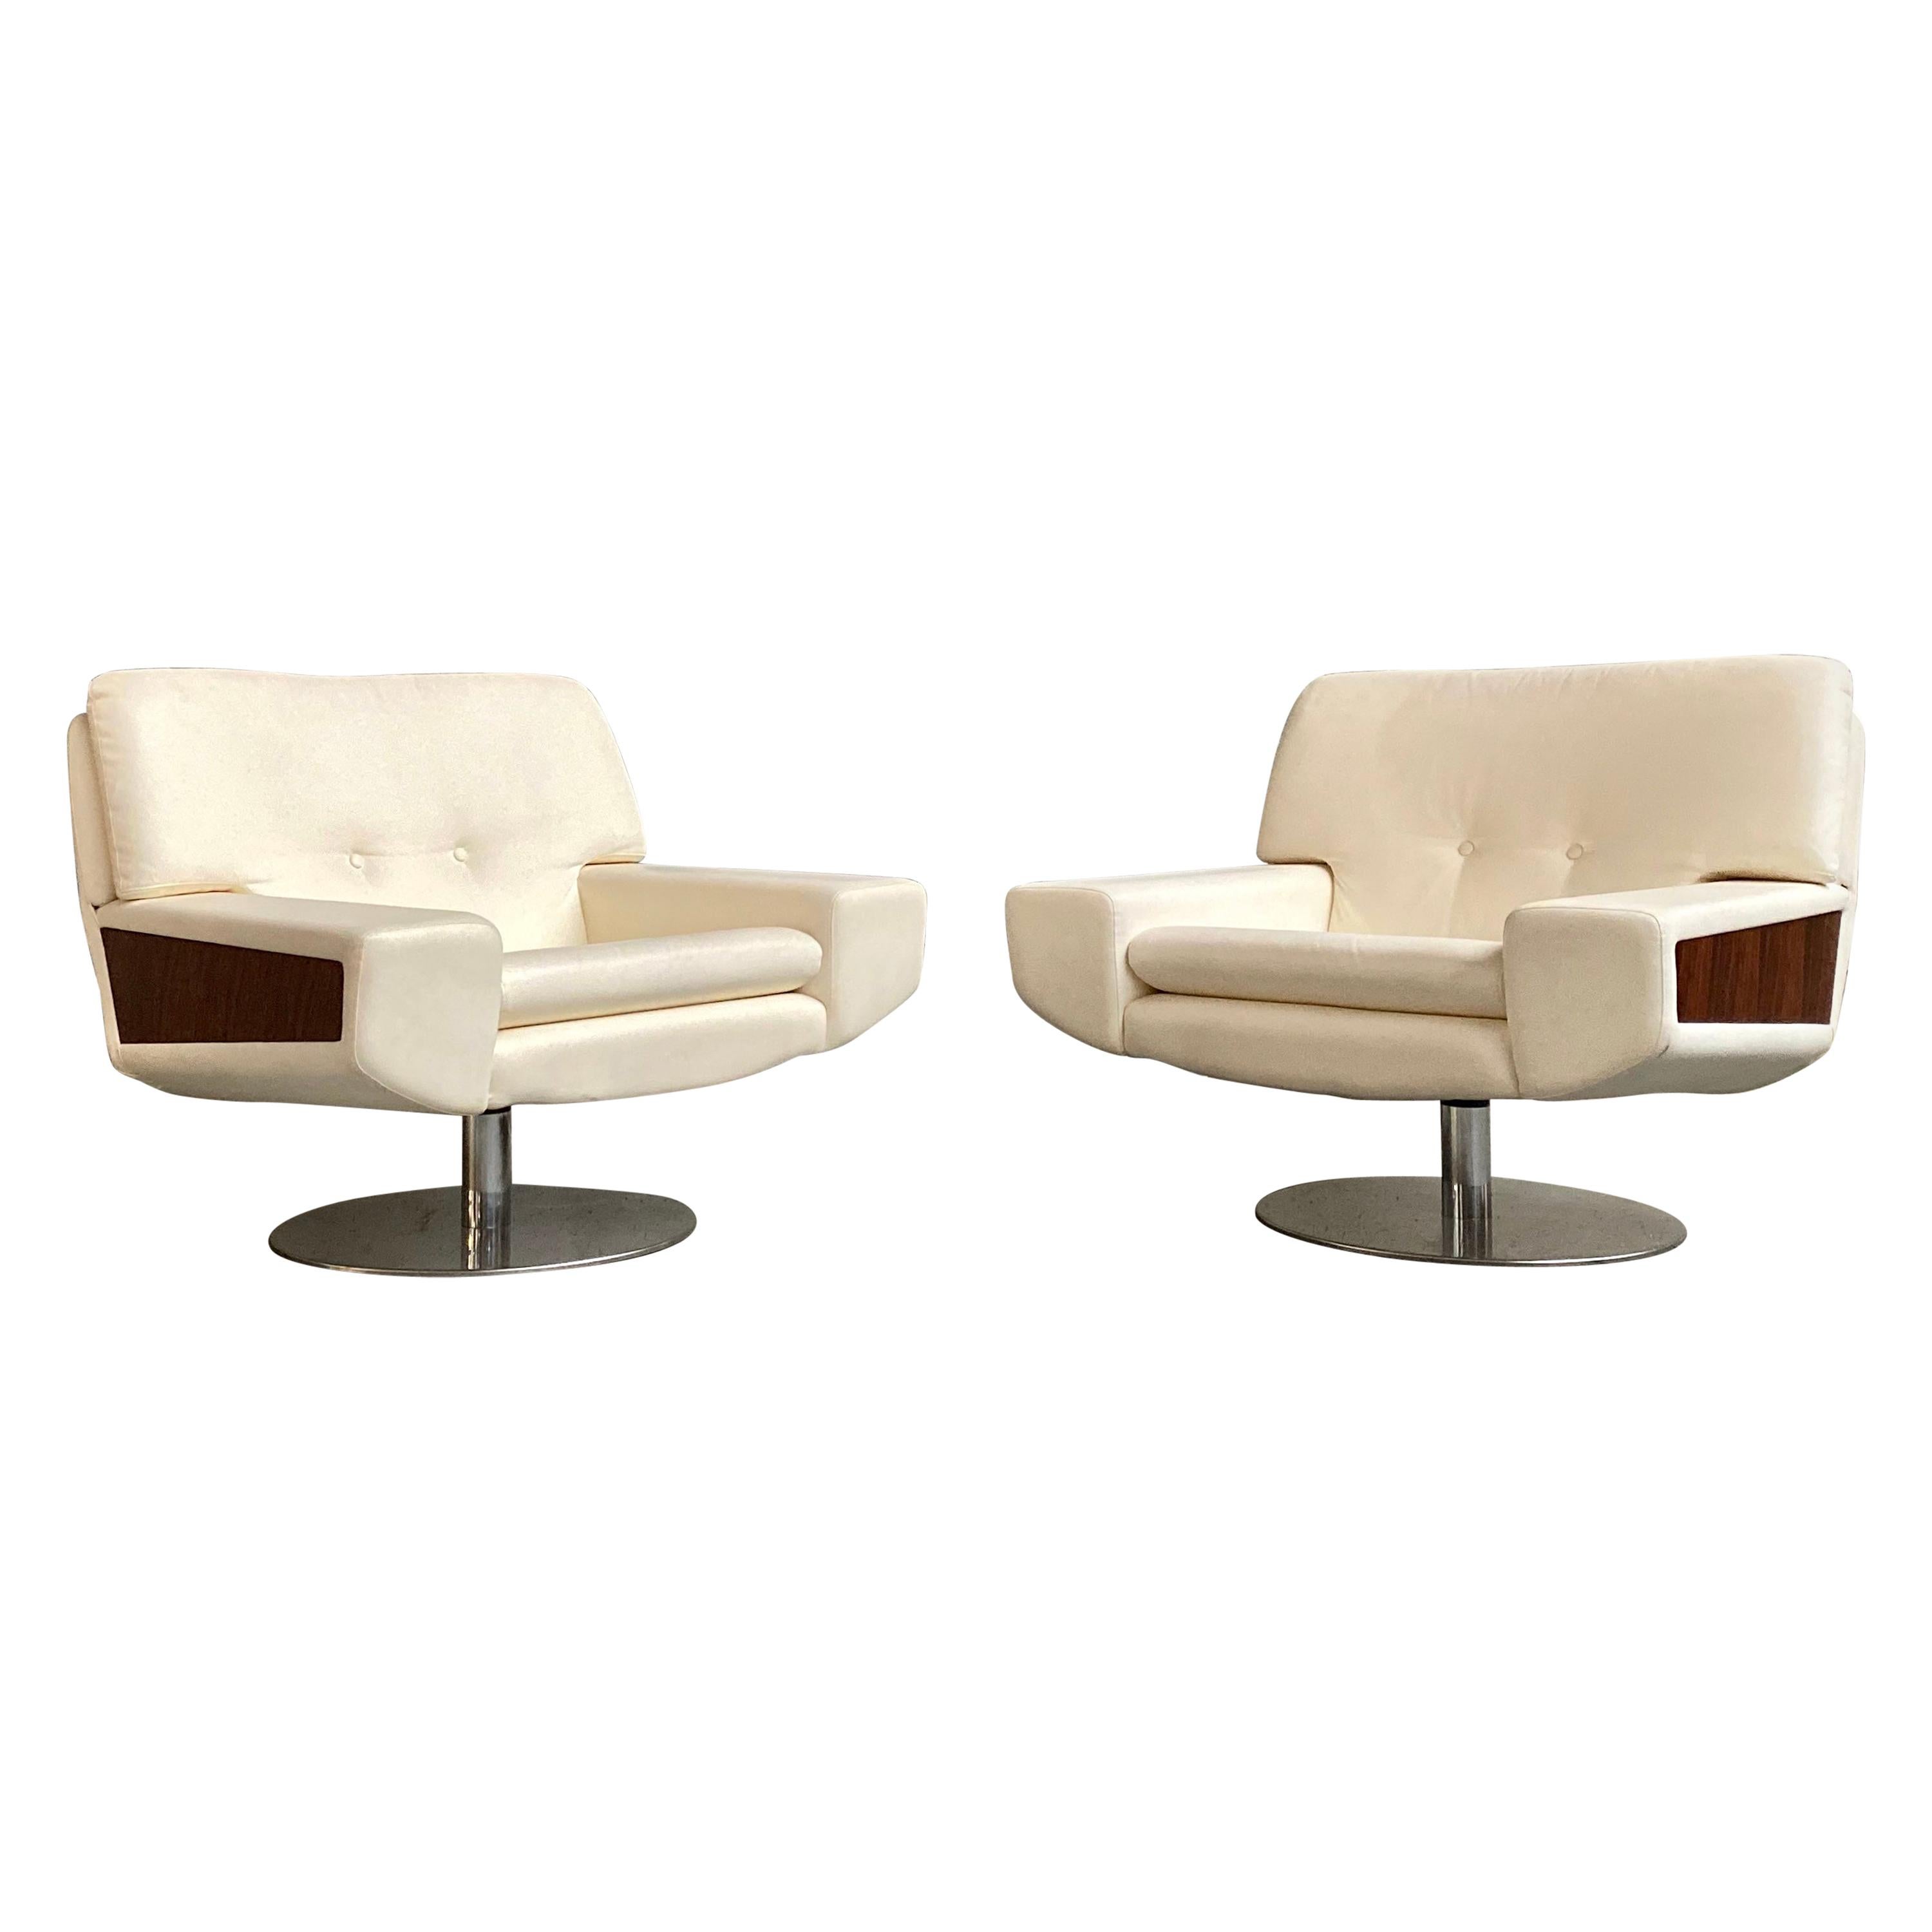 Pair of Space Age Italian Leather Armchairs, 1975